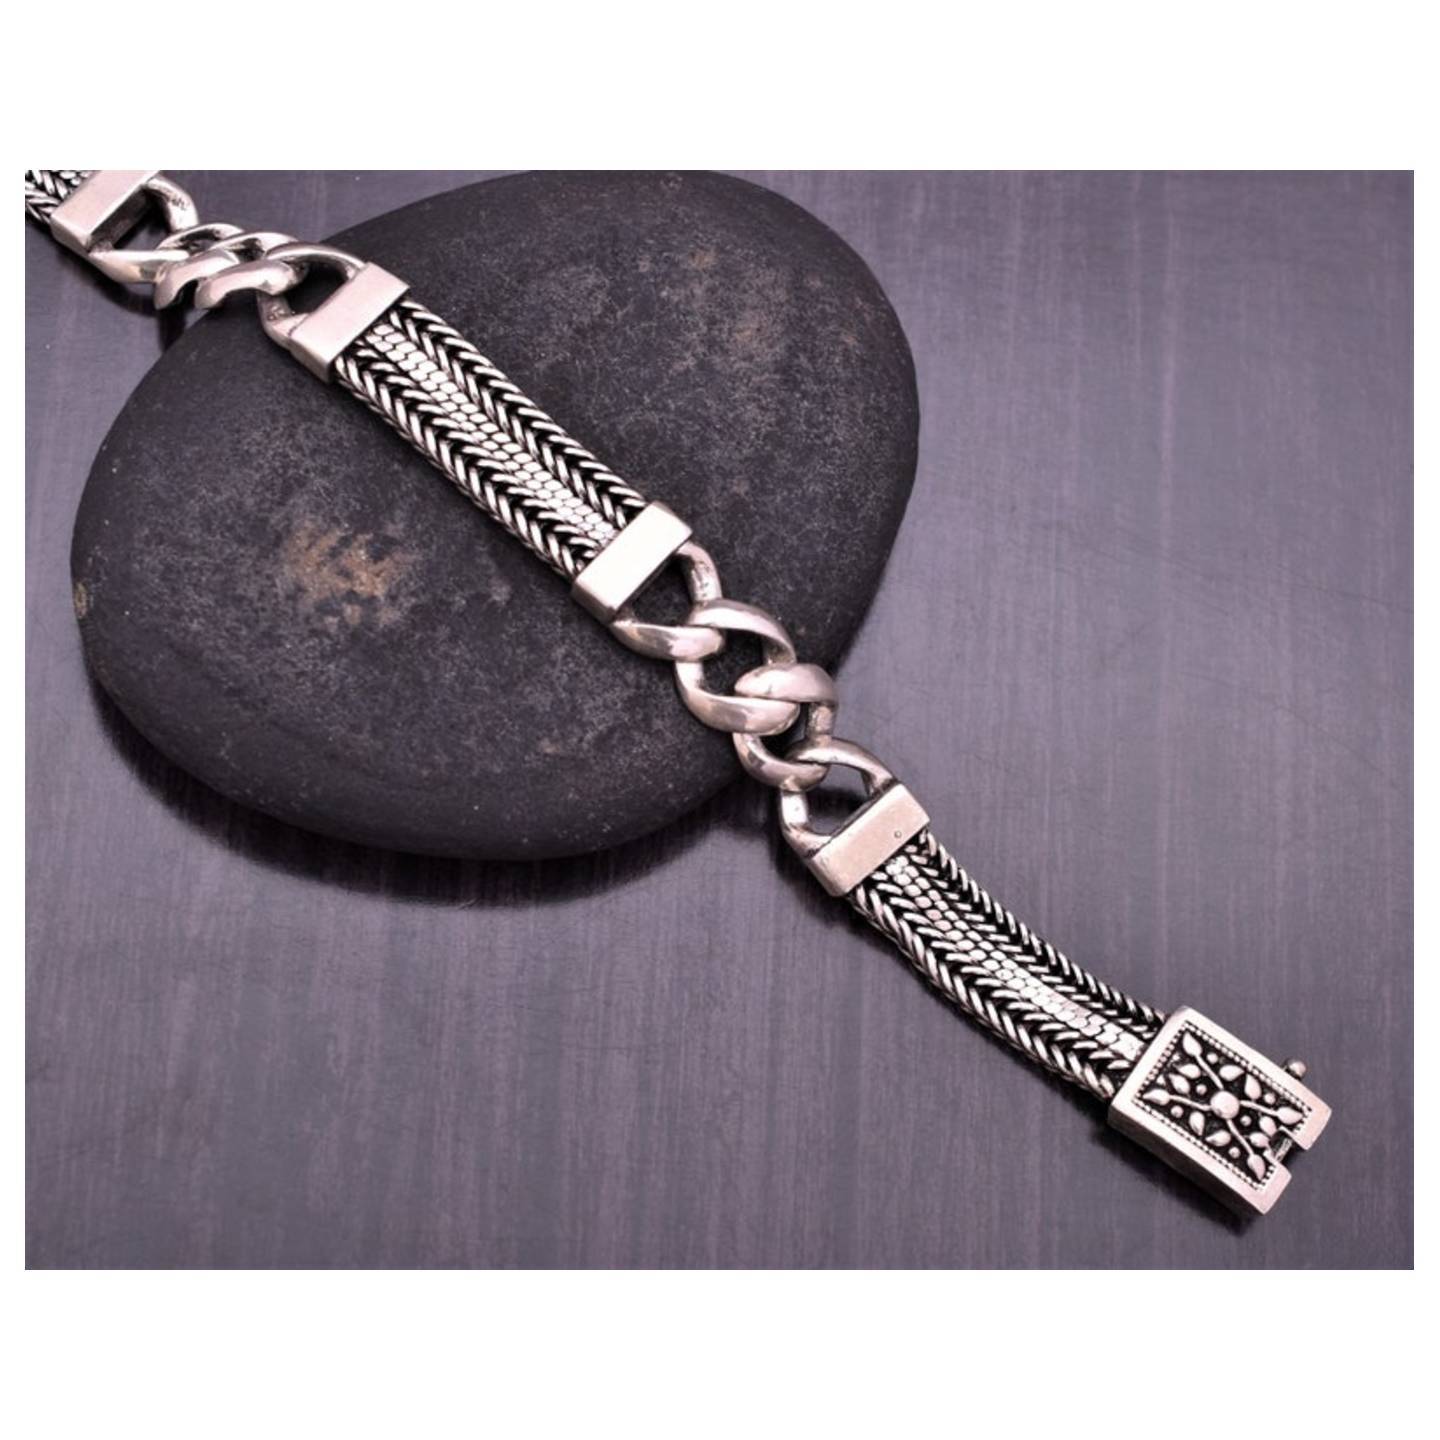 Beautiful Solid 925 Sterling Silver Palm & Curb Chain Bracelet - Silver Oxidize Cuff Bracelet - Length 8.75 Inches -Handmade Heavy Bracelet